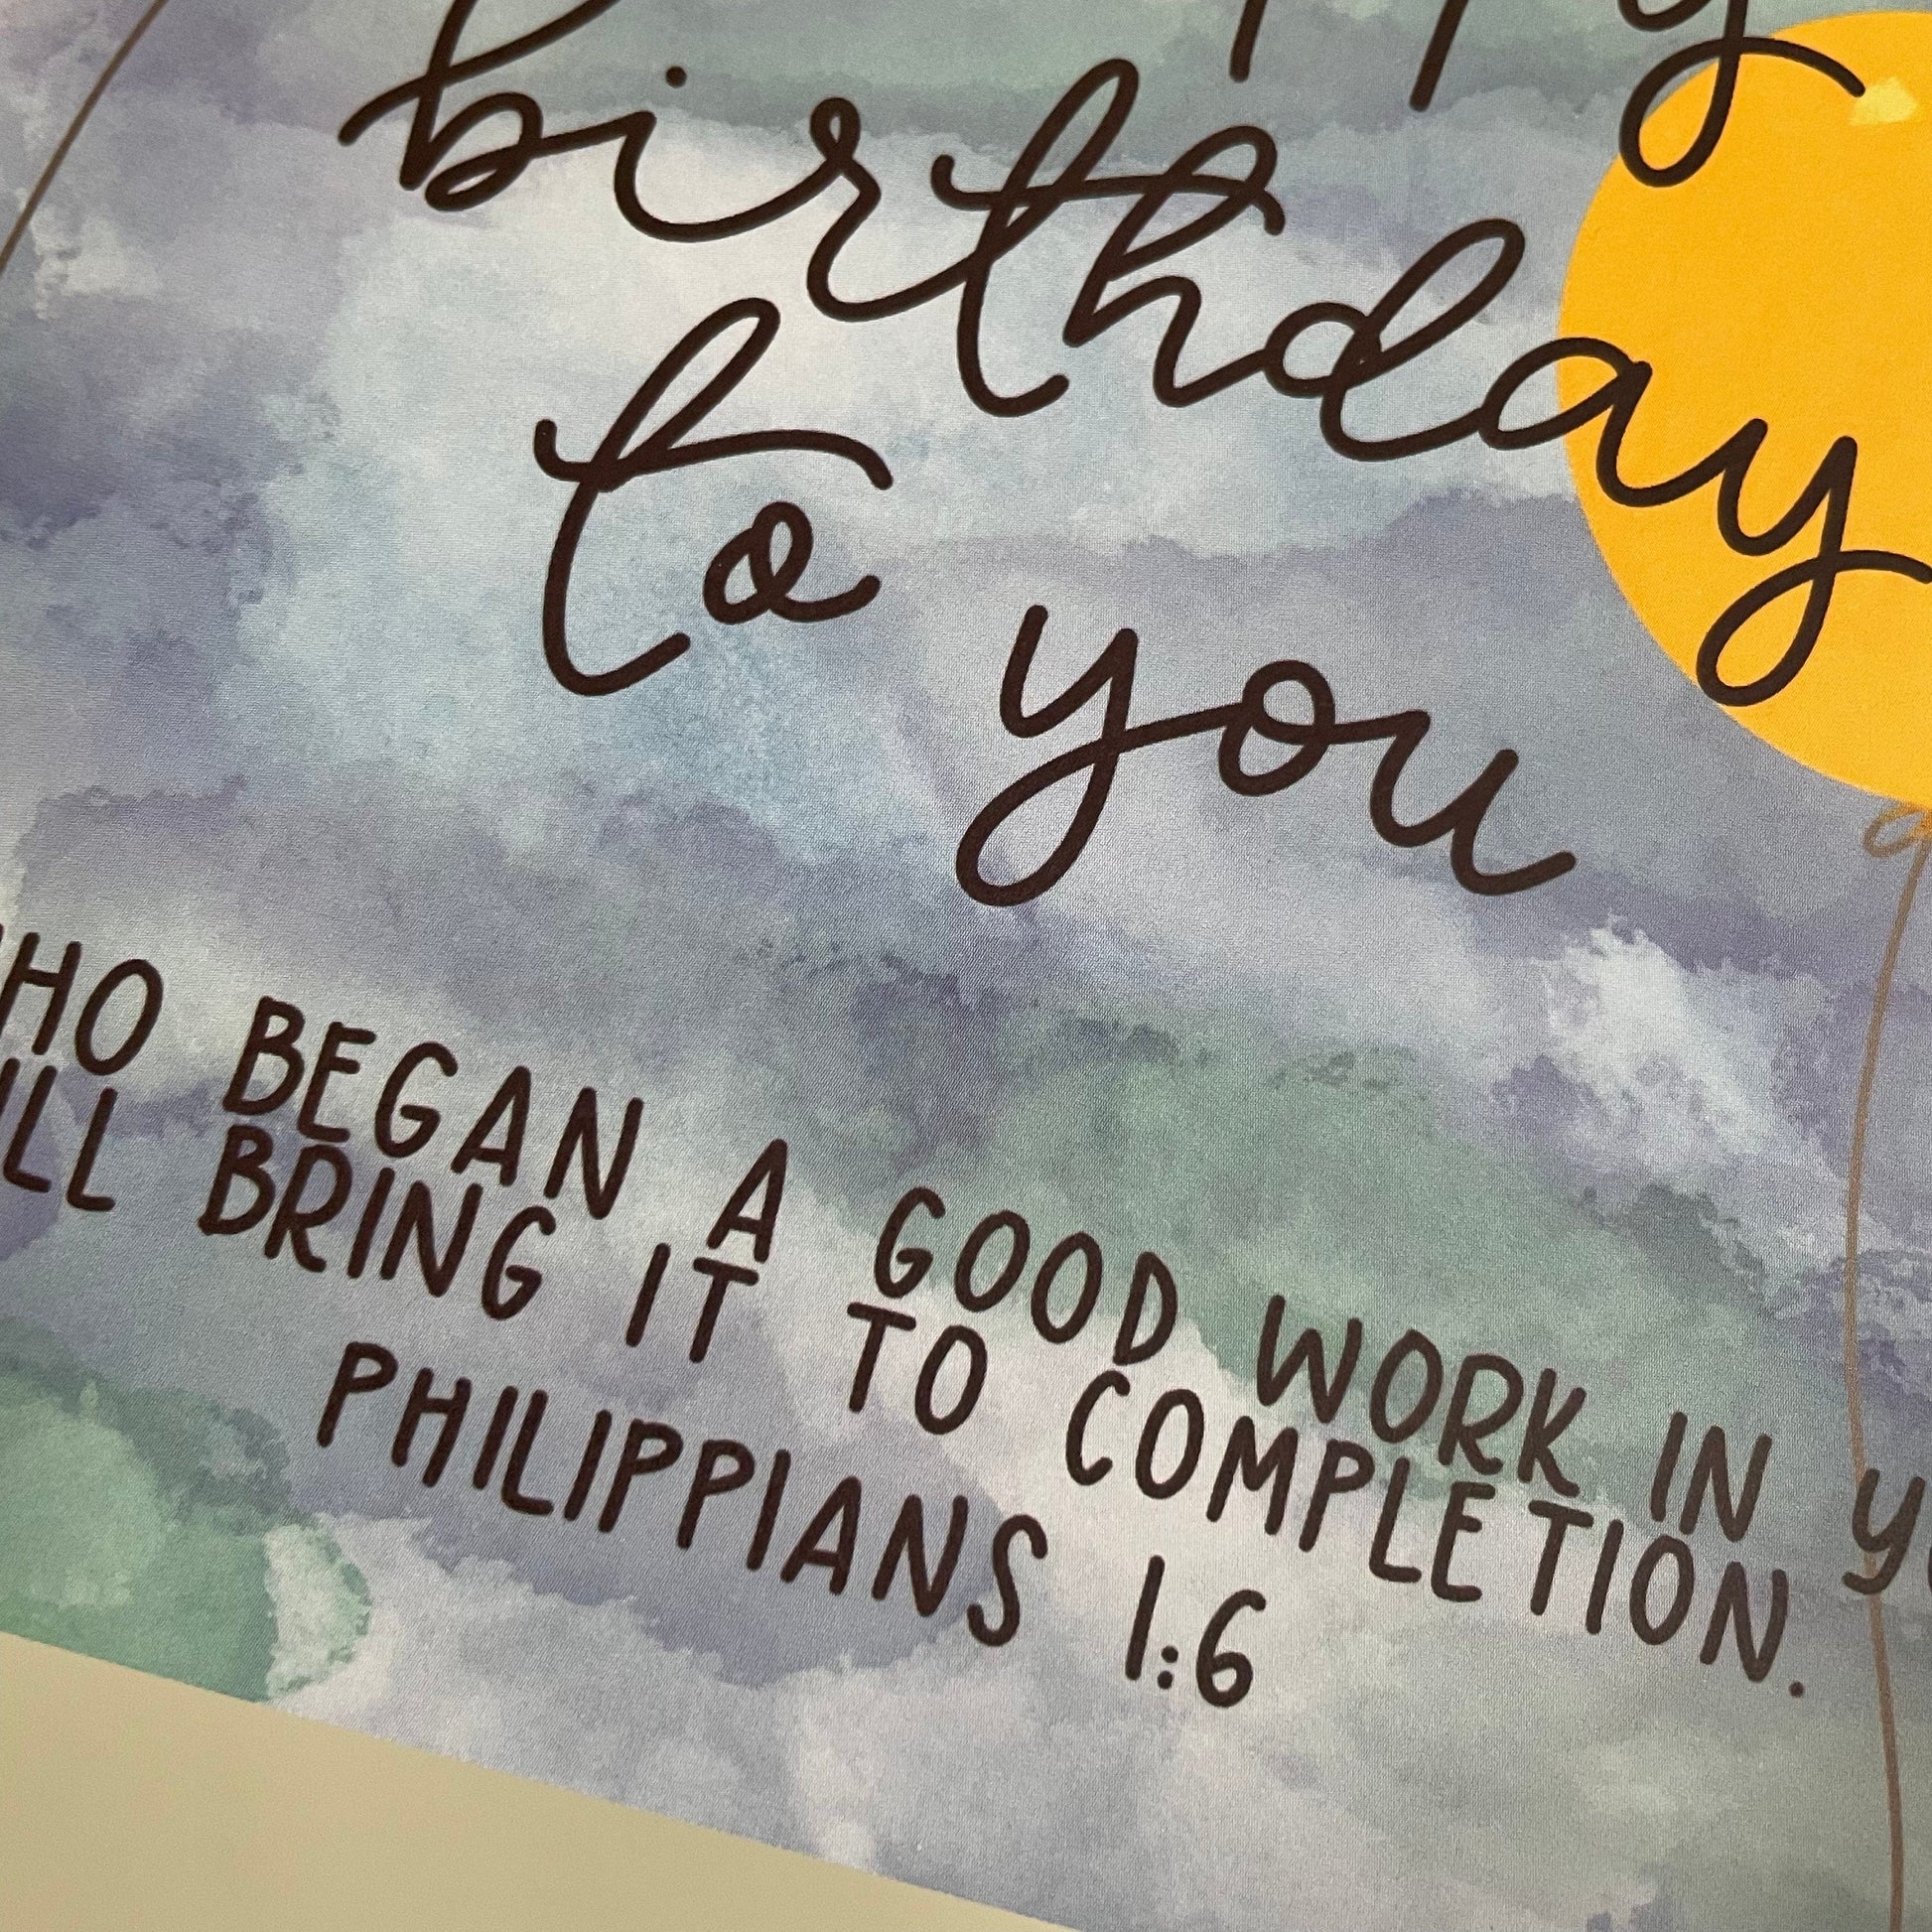 Christian birthday card - he who began a good work in you And Hope Designs Cards